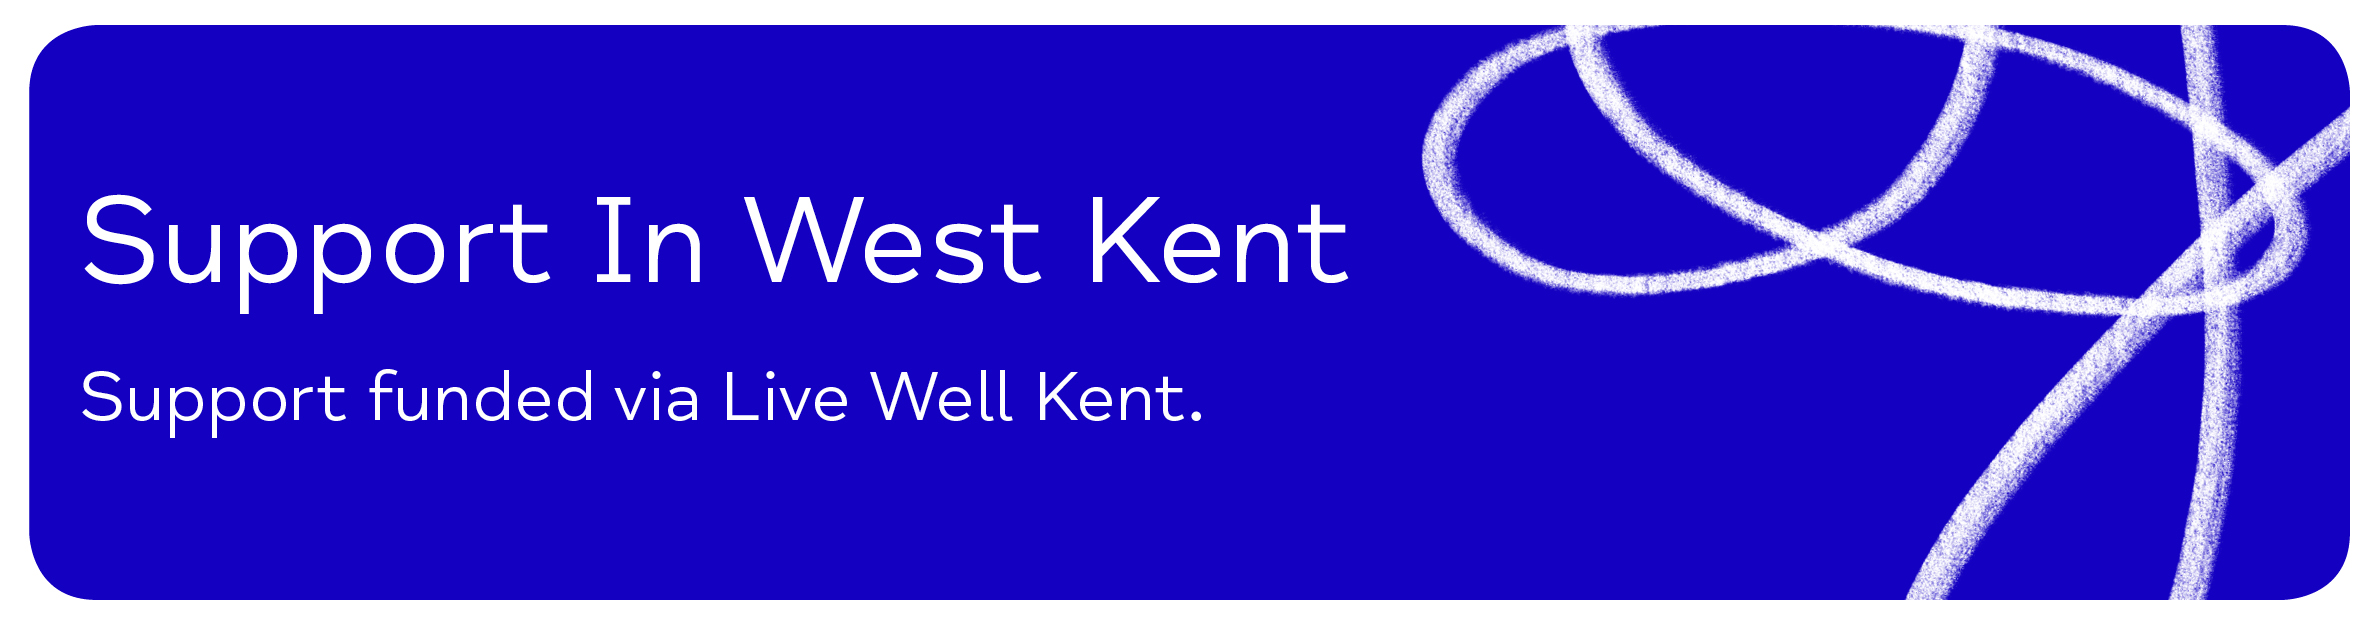 Support In West Kent. Support funded via Live Well Kent.